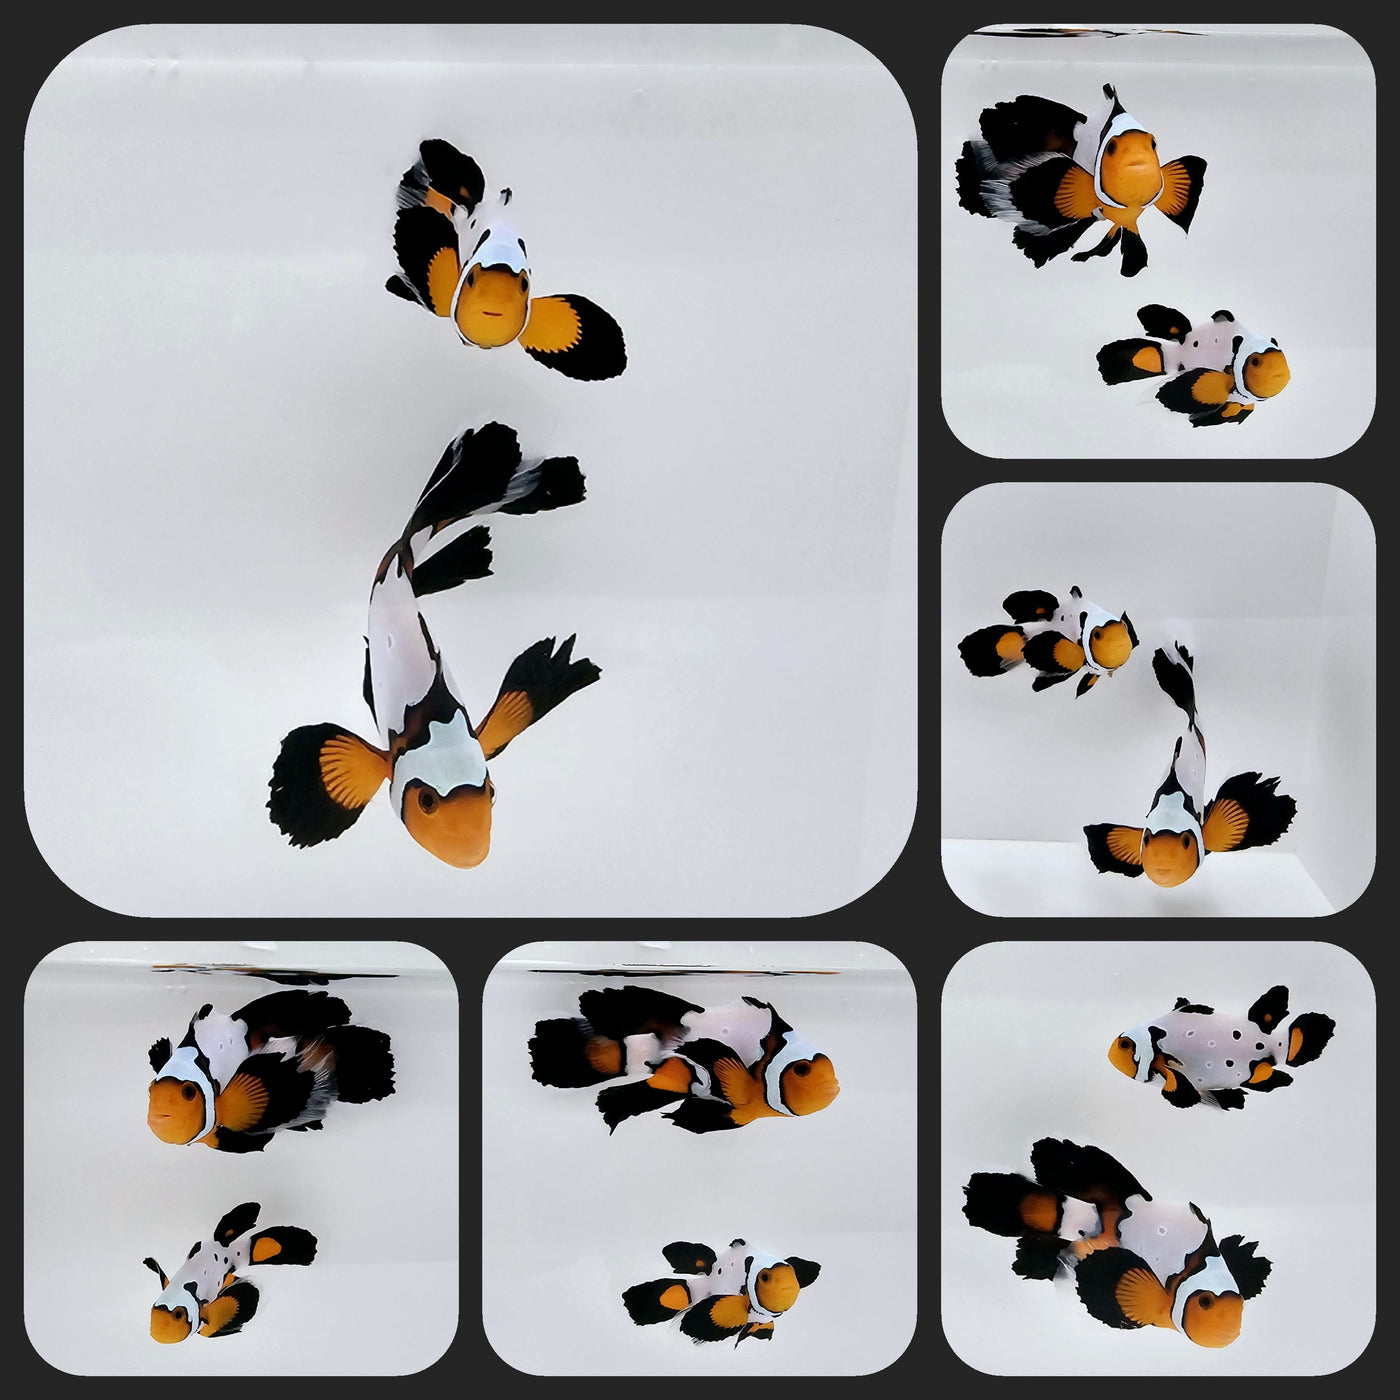 Clownfish Bonded Pair Black Ice Roundtail Longfin